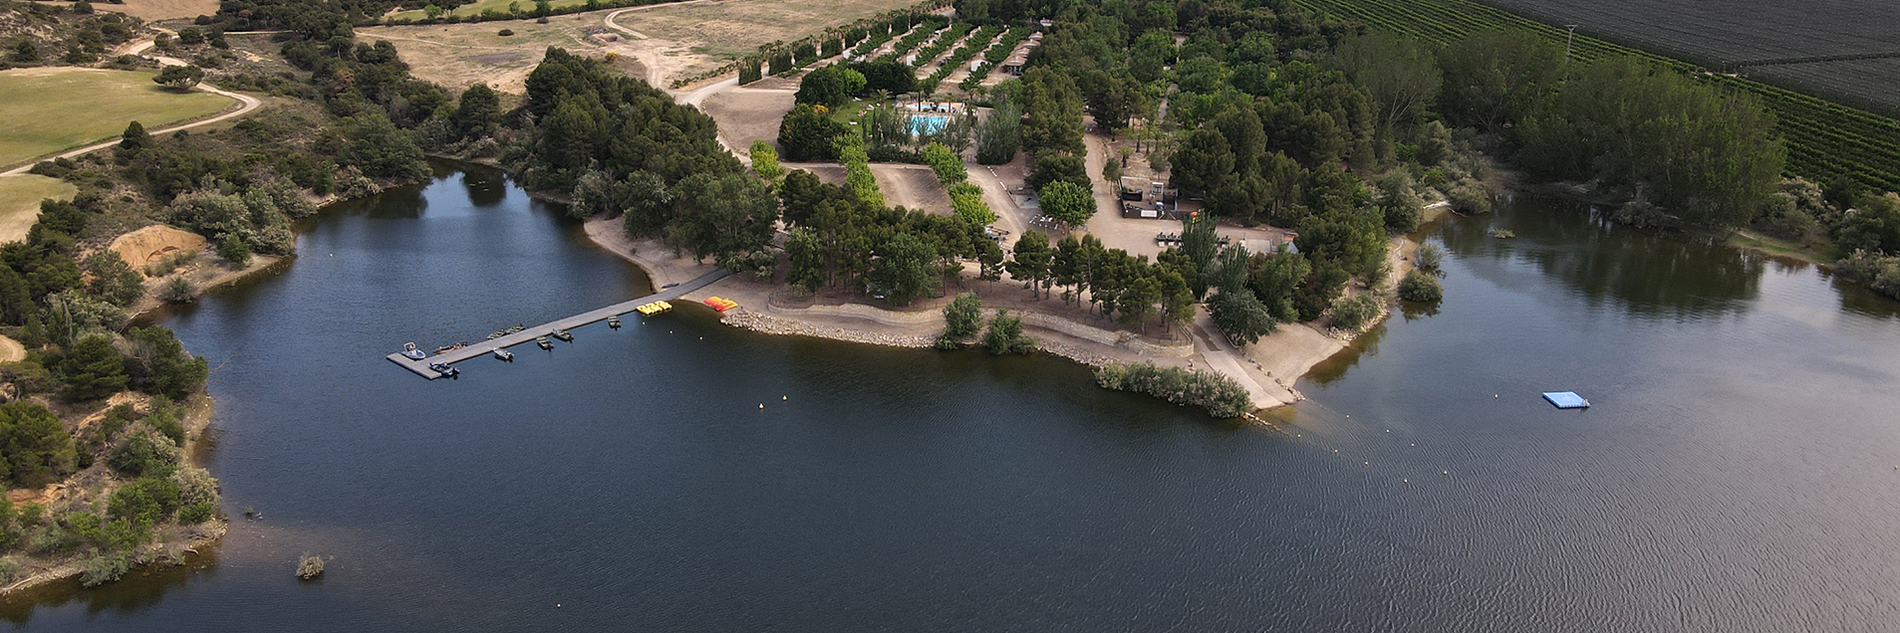 an aerial view of a lake with a dock in the middle